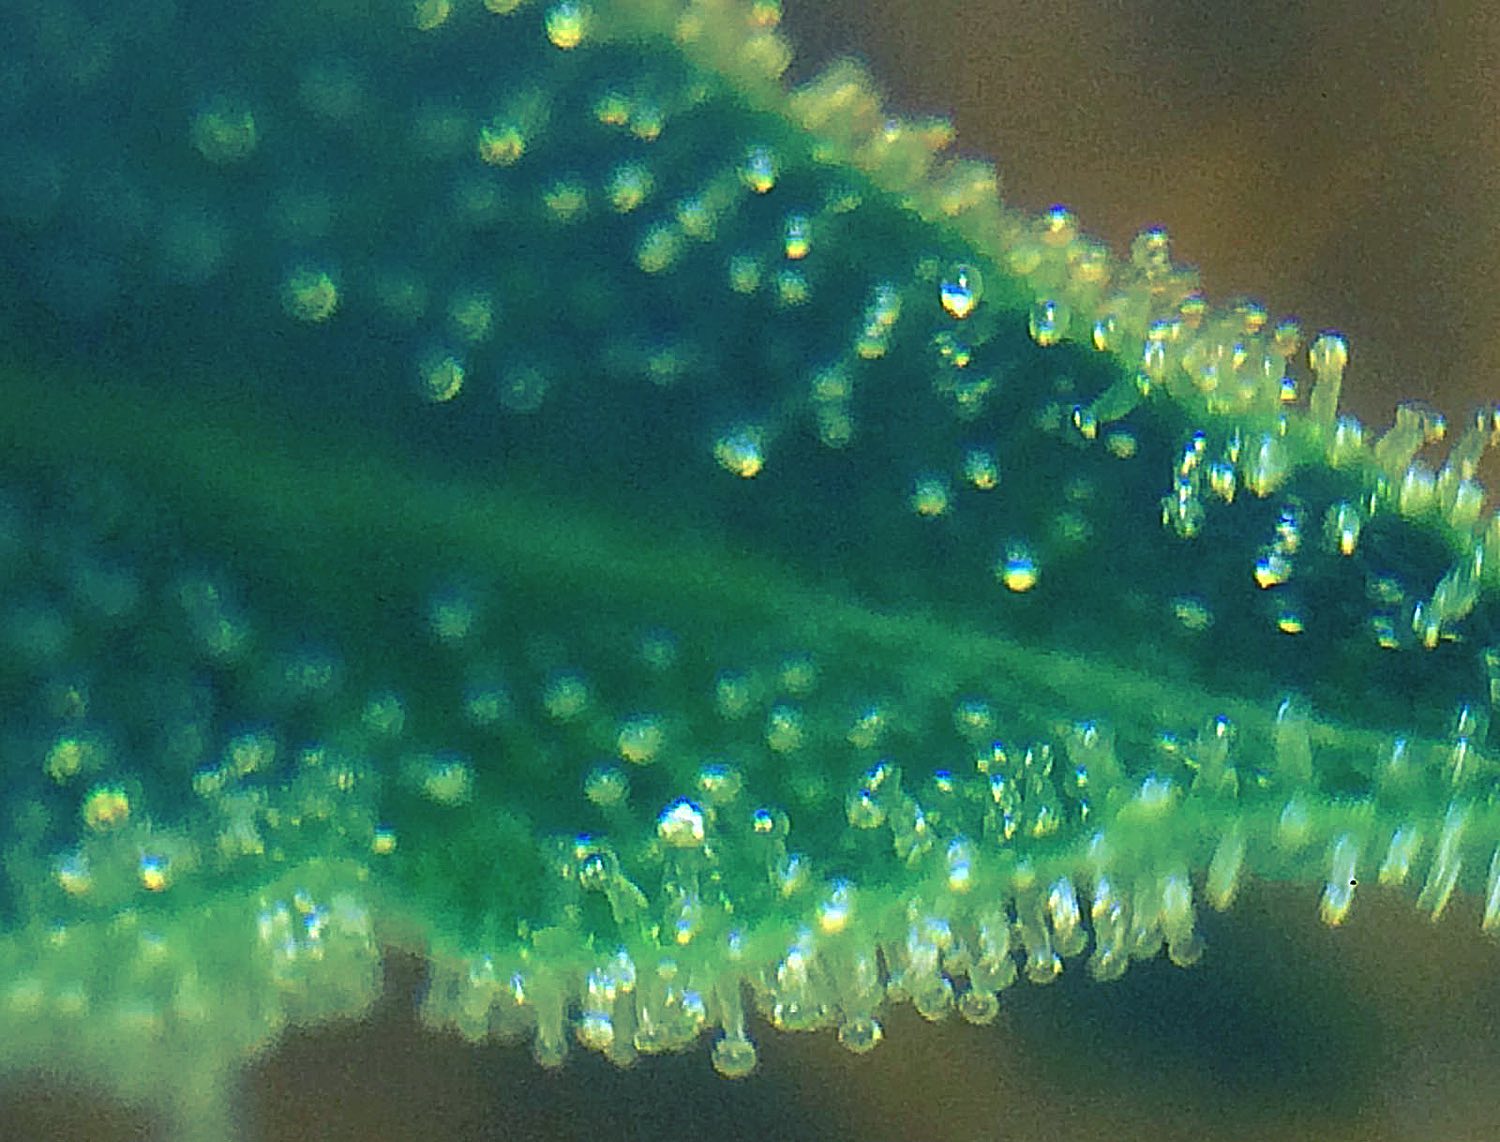 Transparent Trichomes on a Leaf of Cannabis Plant